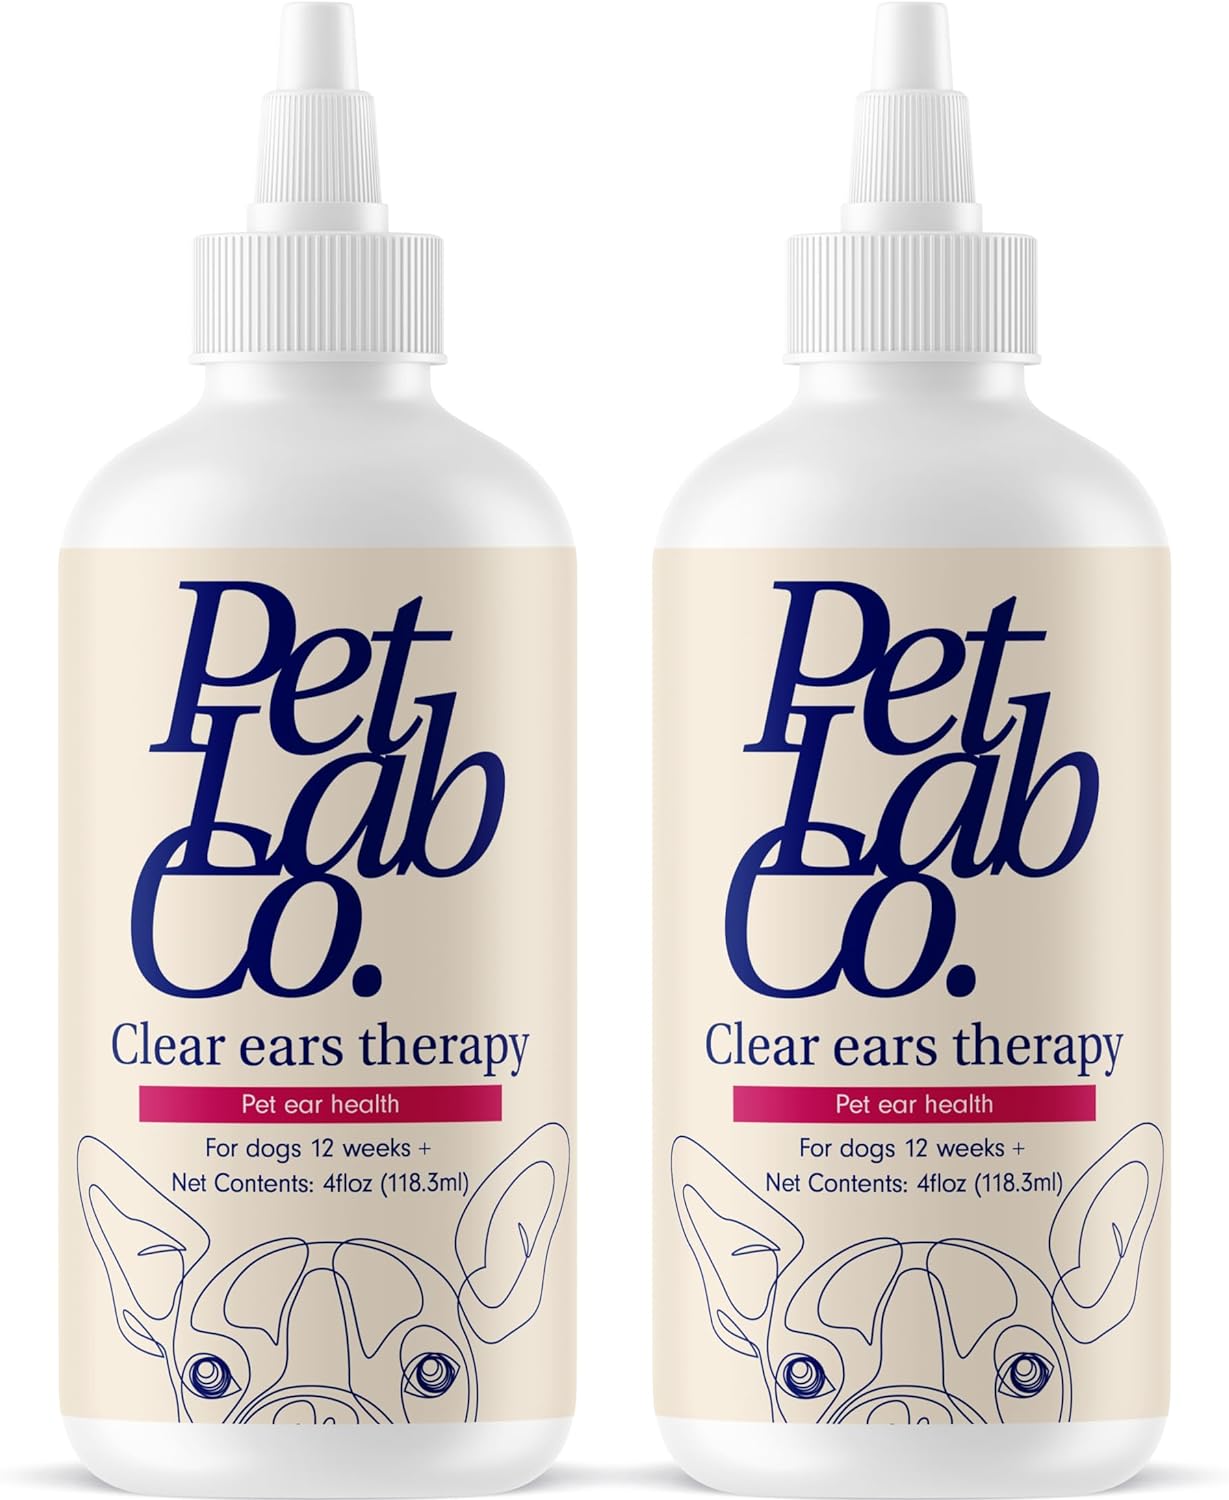 Petlab Co. Clear Ears Therapy Ear Cleaner for Dogs - Supporting Yeast, Itchy Ears & Healthy Ear Canals - Alcohol-Free Dog Ear Wash - Optimized Dog Ear Cleaner Solution - 4 oz. Pack of 2